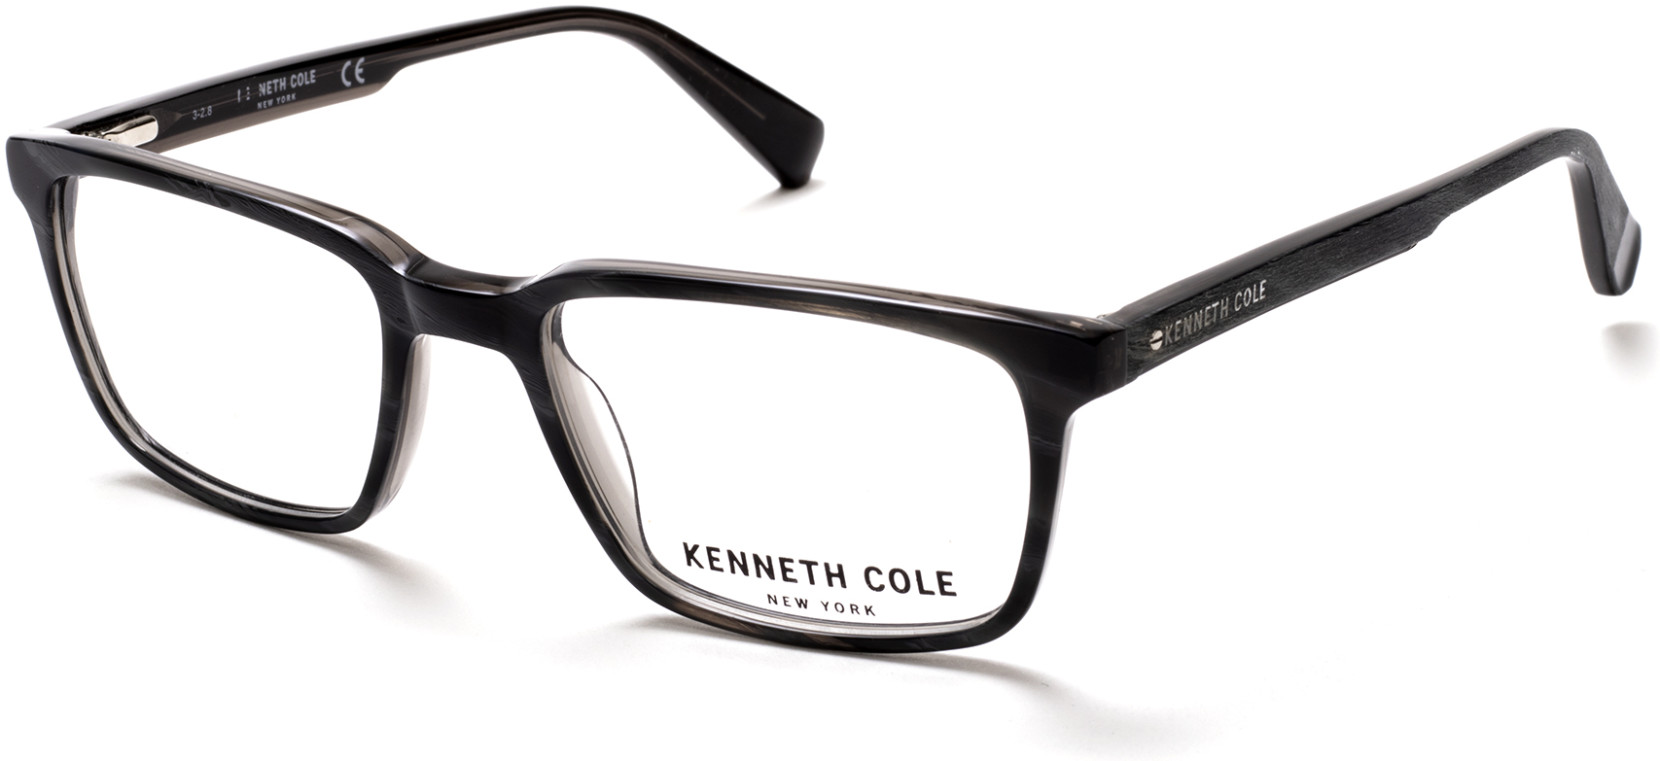 KENNETH COLE NY 0293